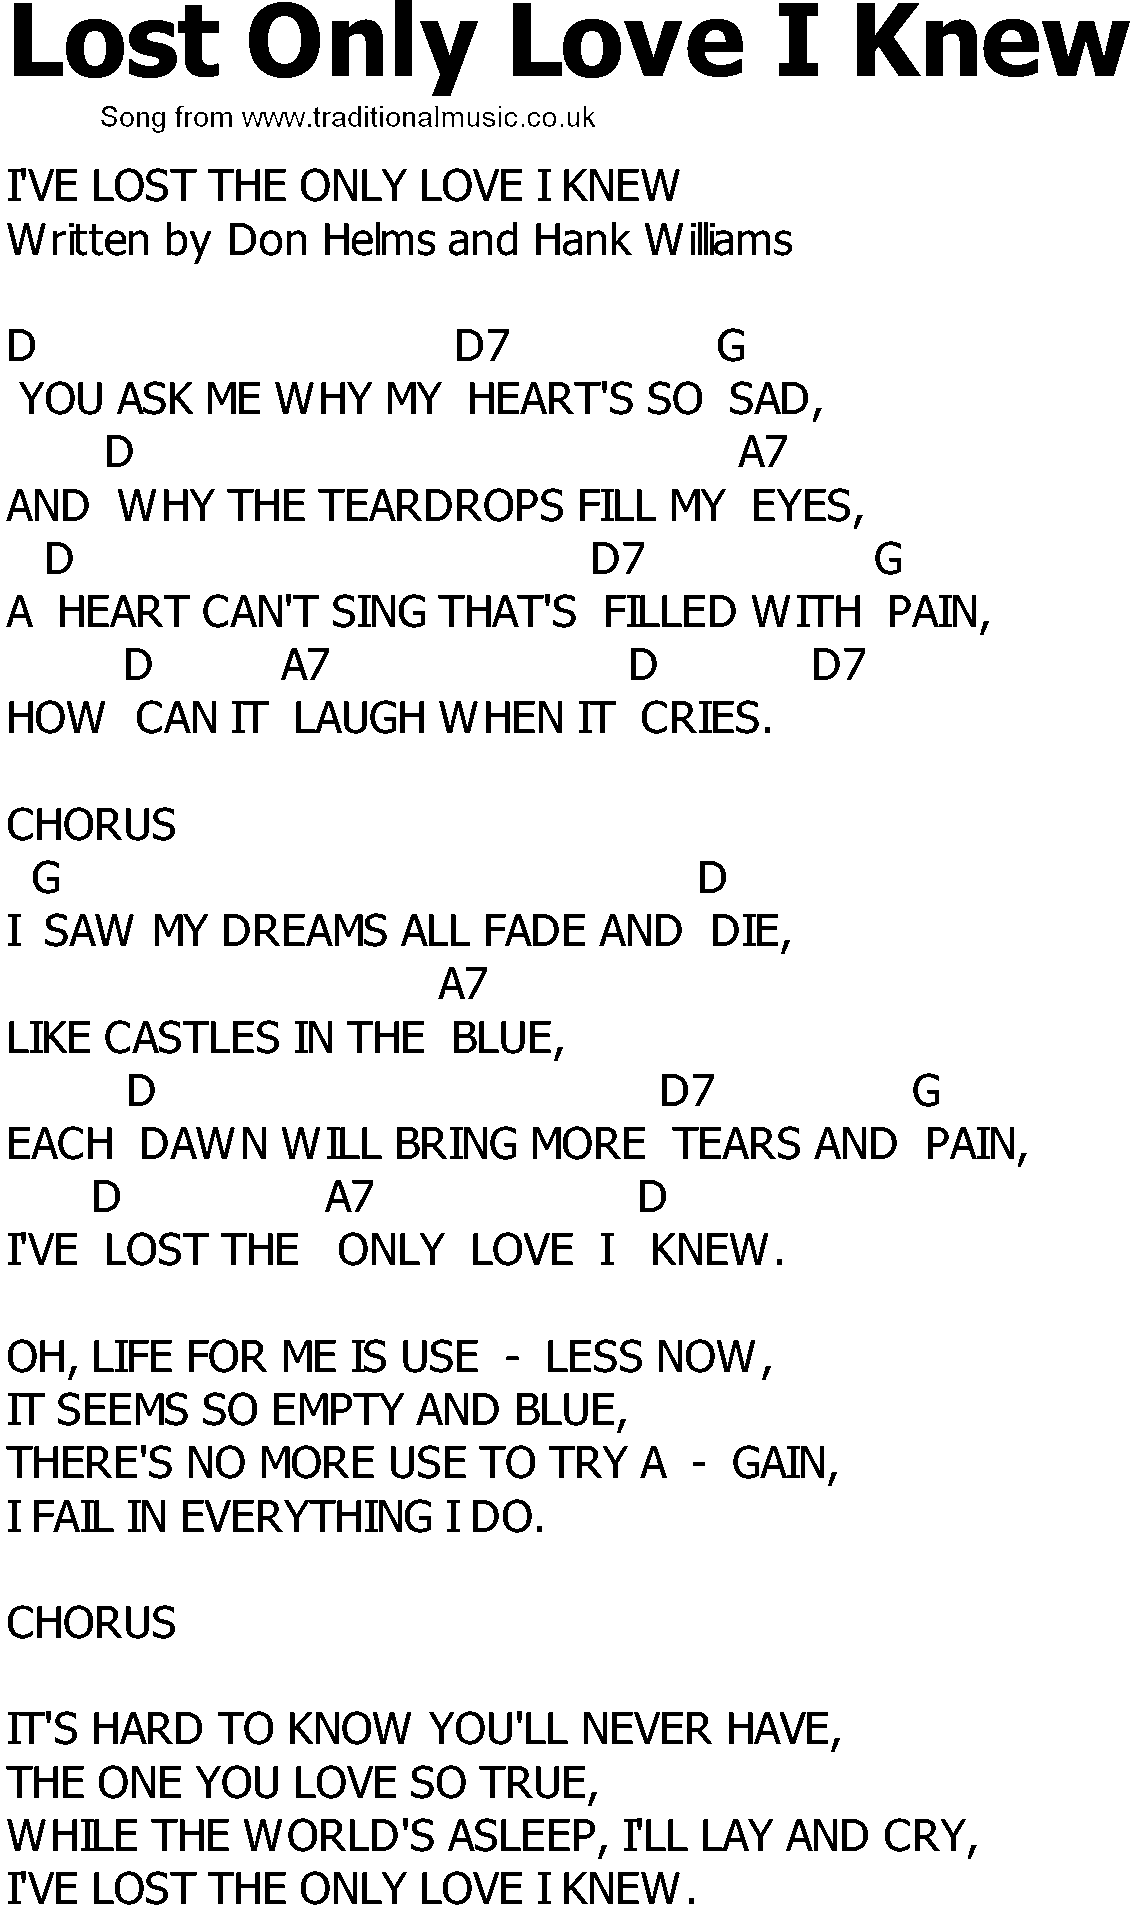 Old Country song lyrics with chords - Lost Only Love I Knew